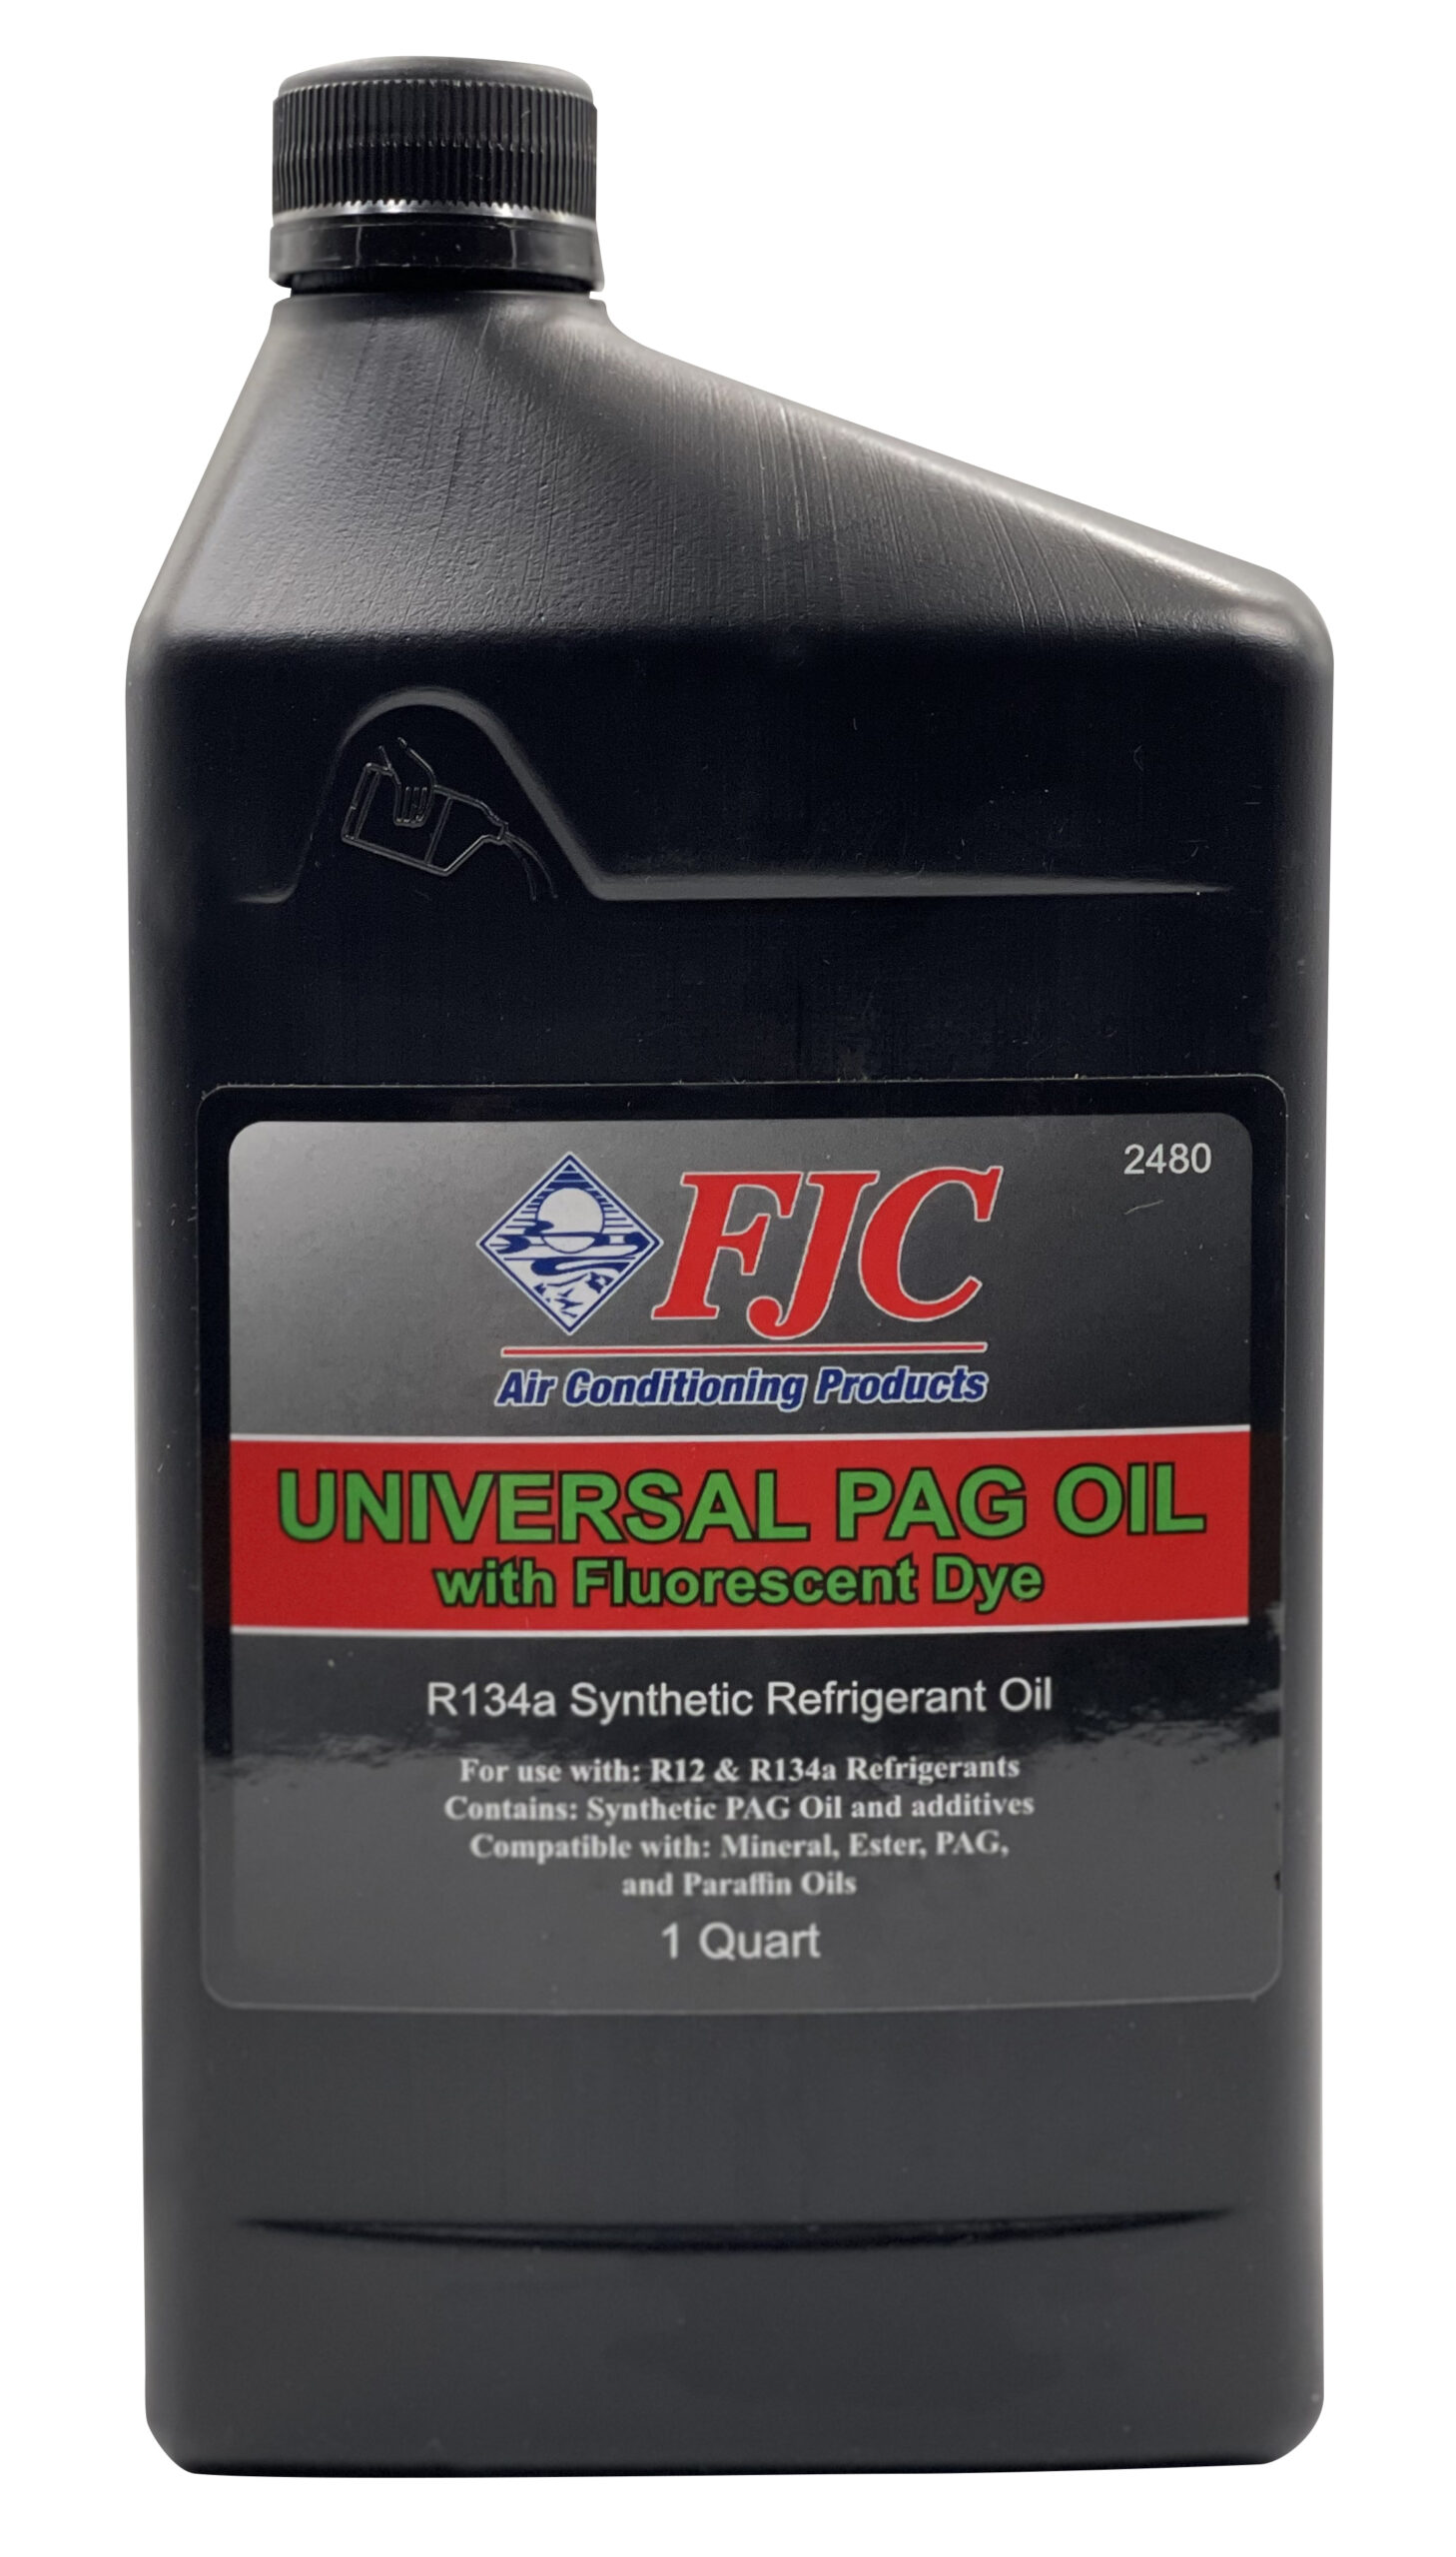 2480 FJC Universal PAG Oil with Fluorescent Dye Quart